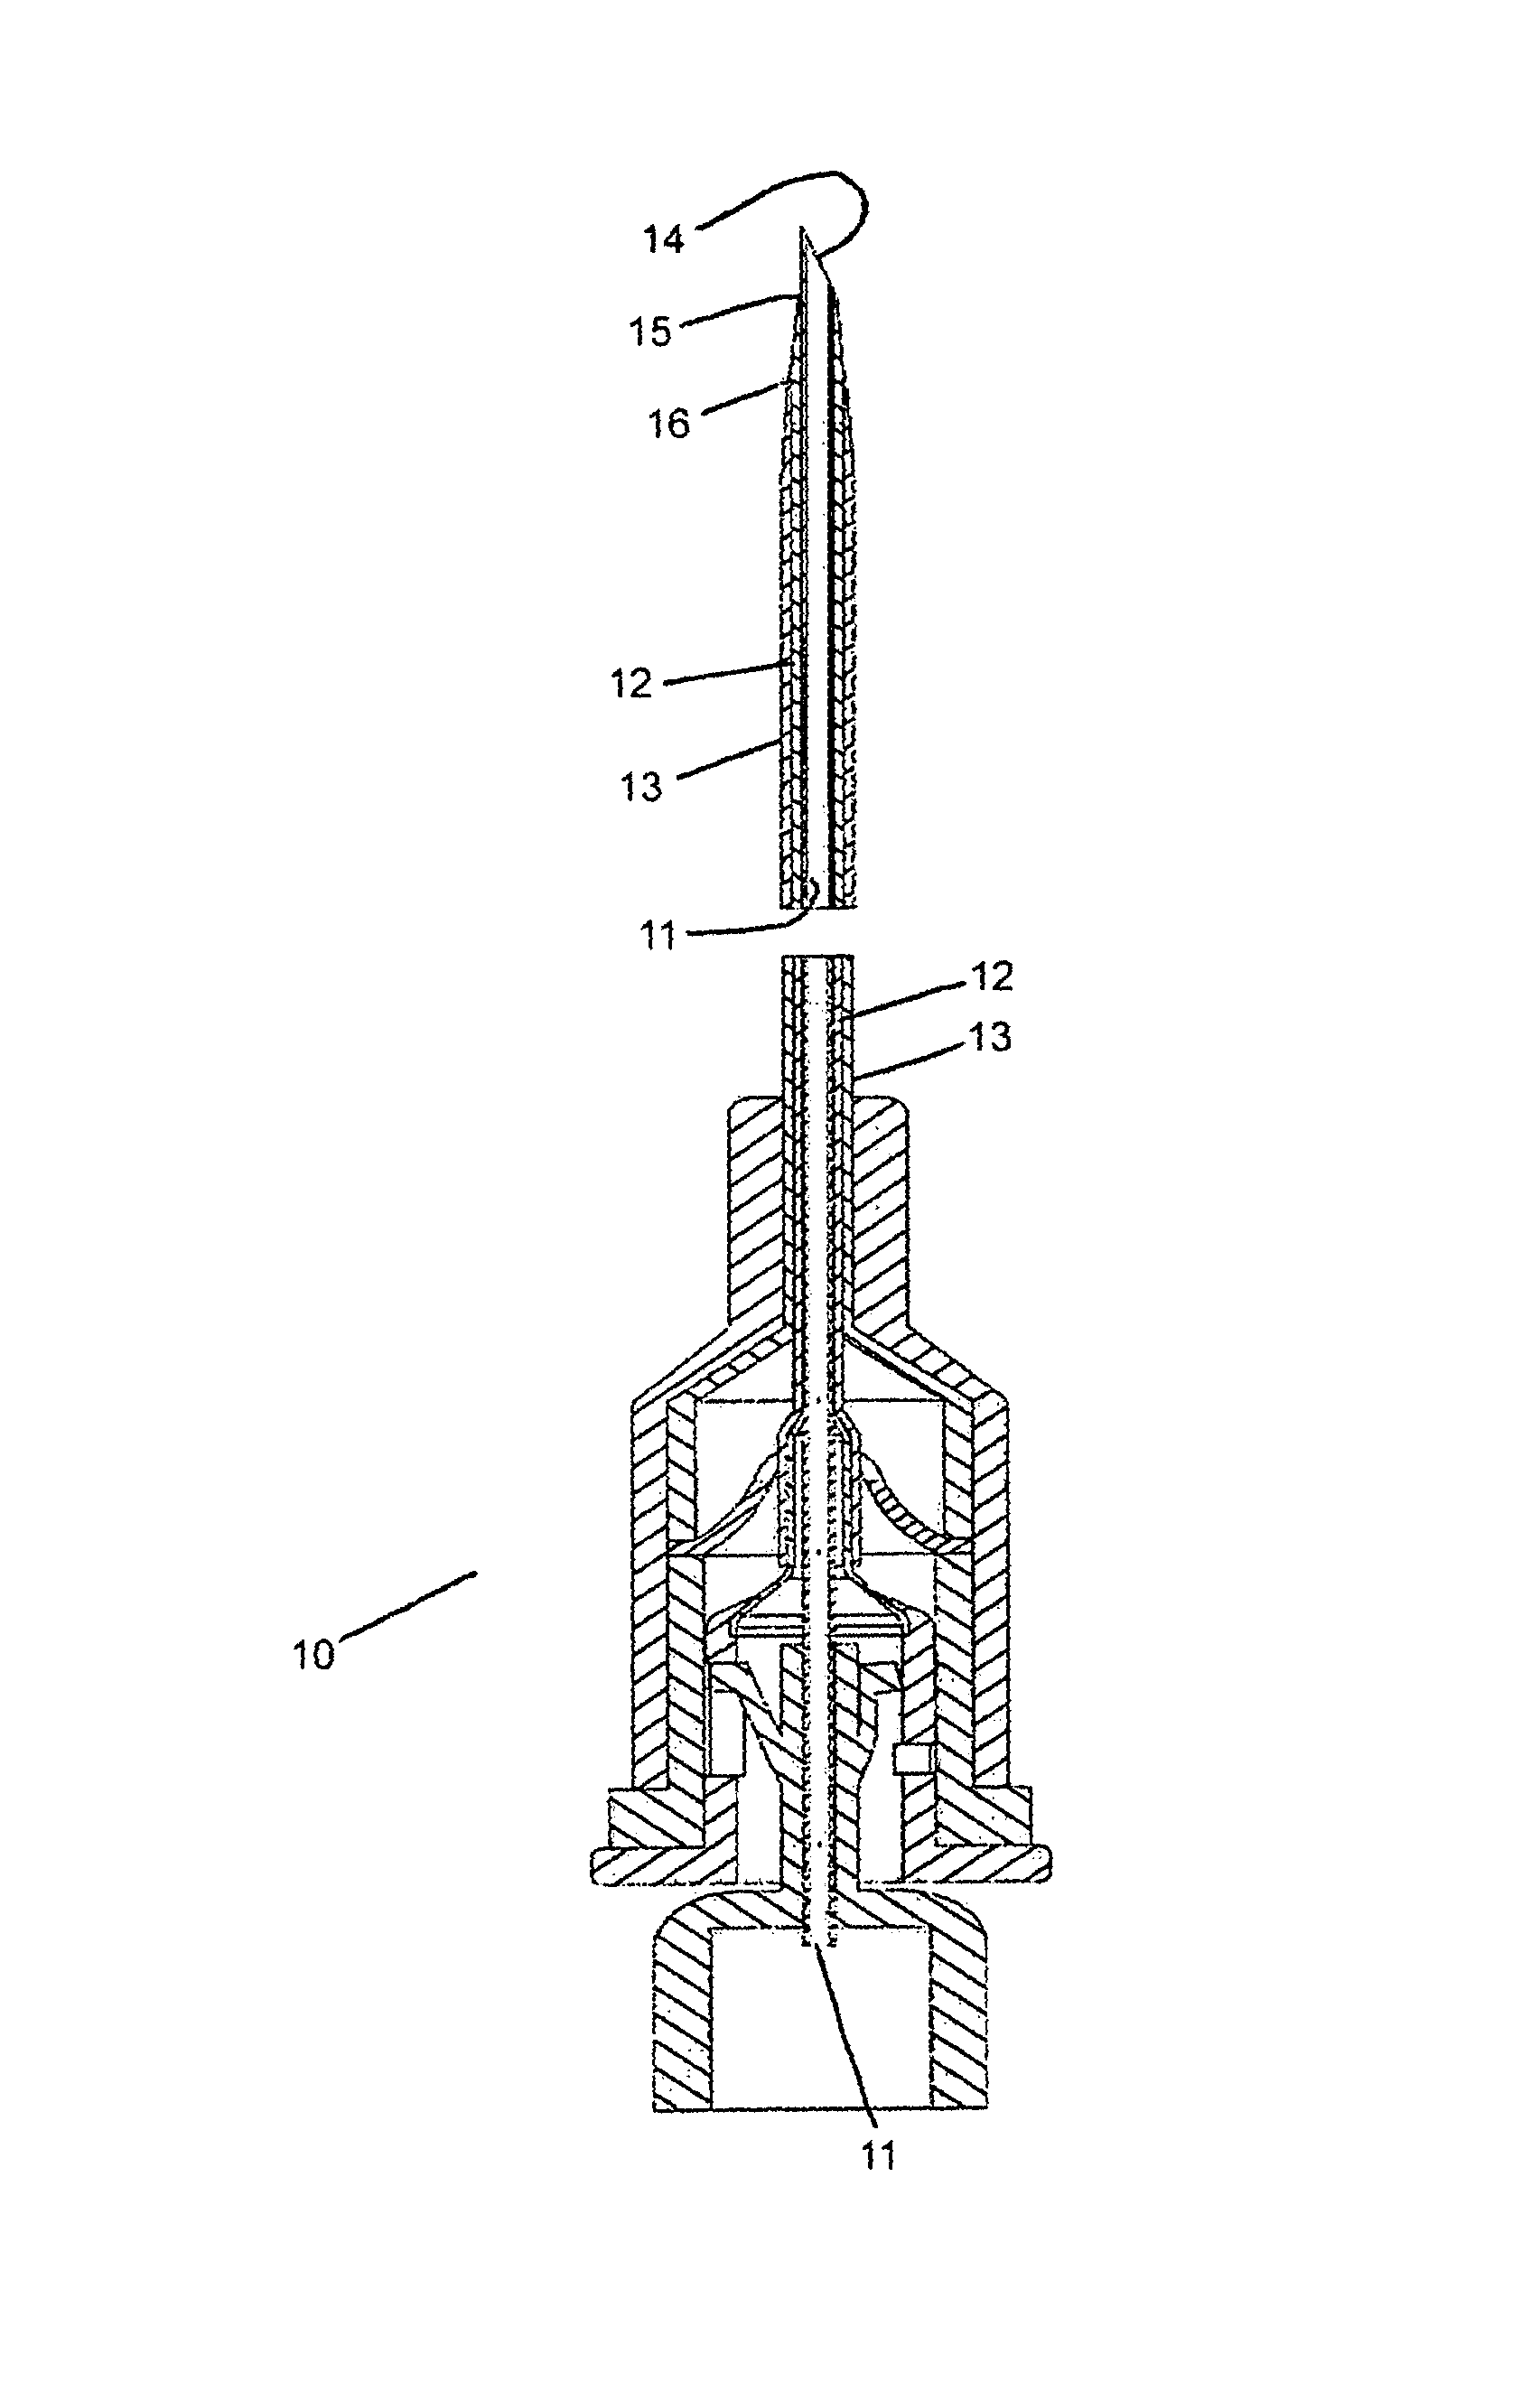 Apparatus for peripheral vascular access